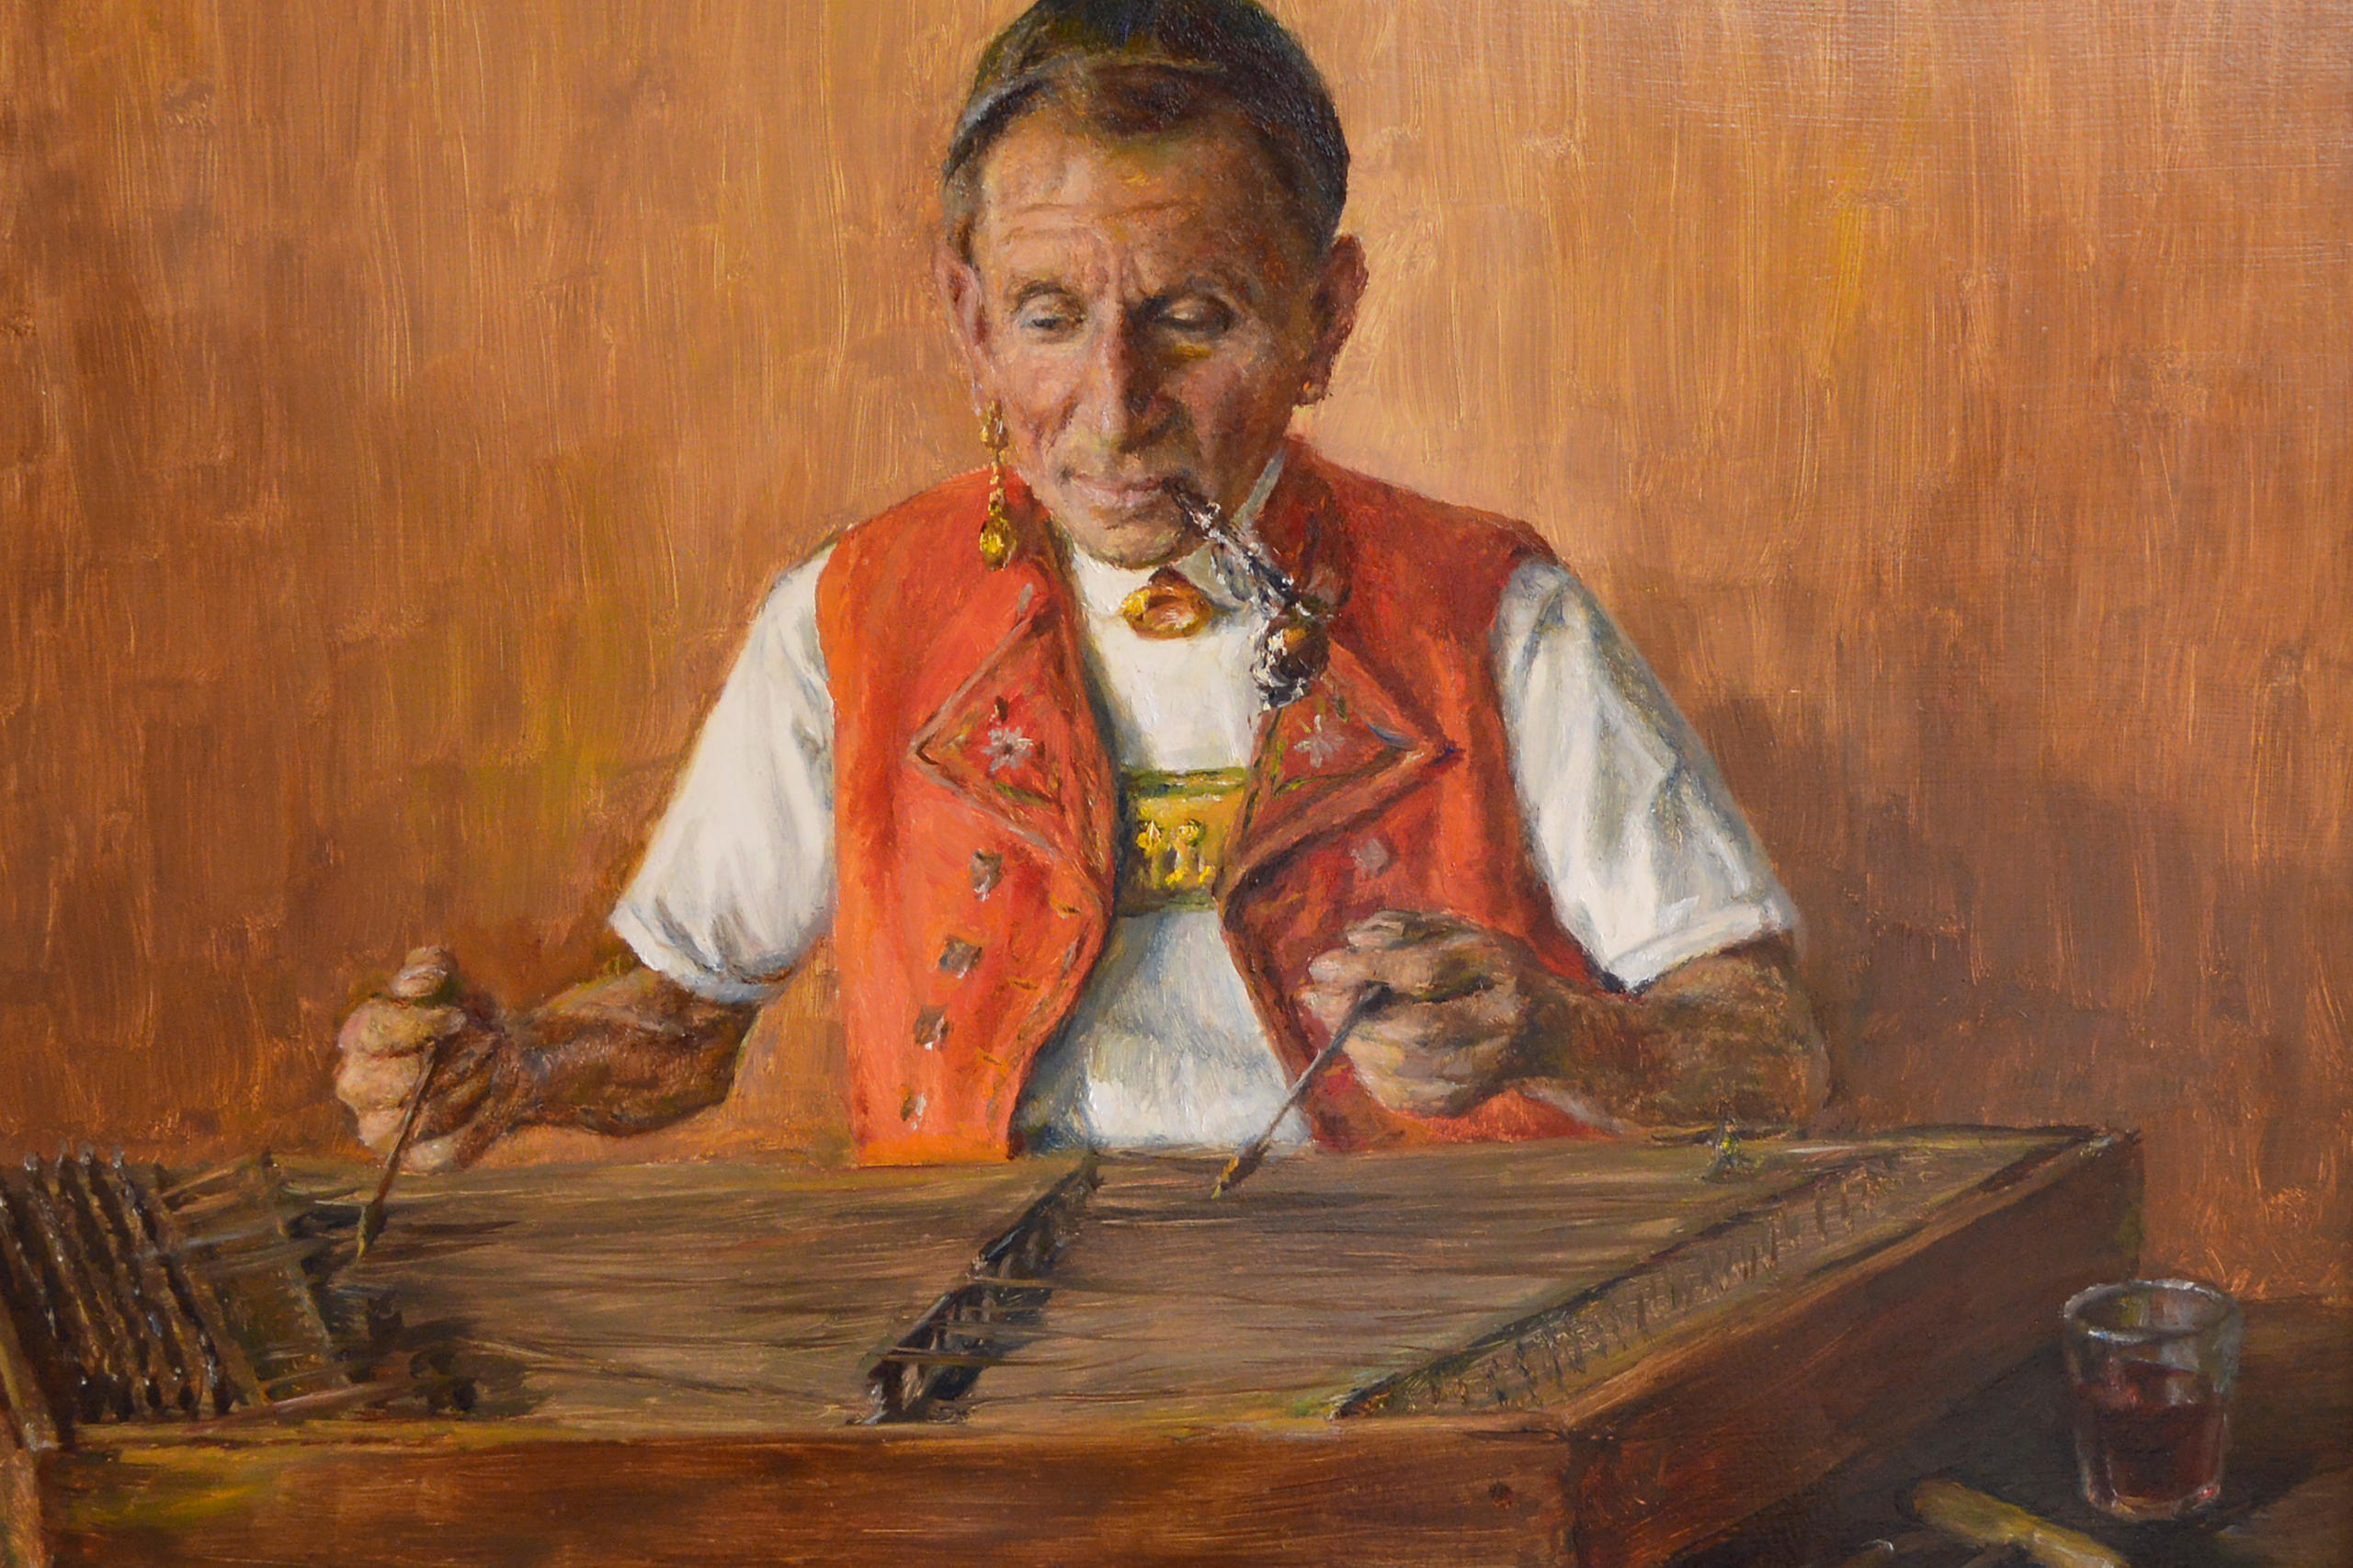 Painting of an Appenzel man playing a string instrument